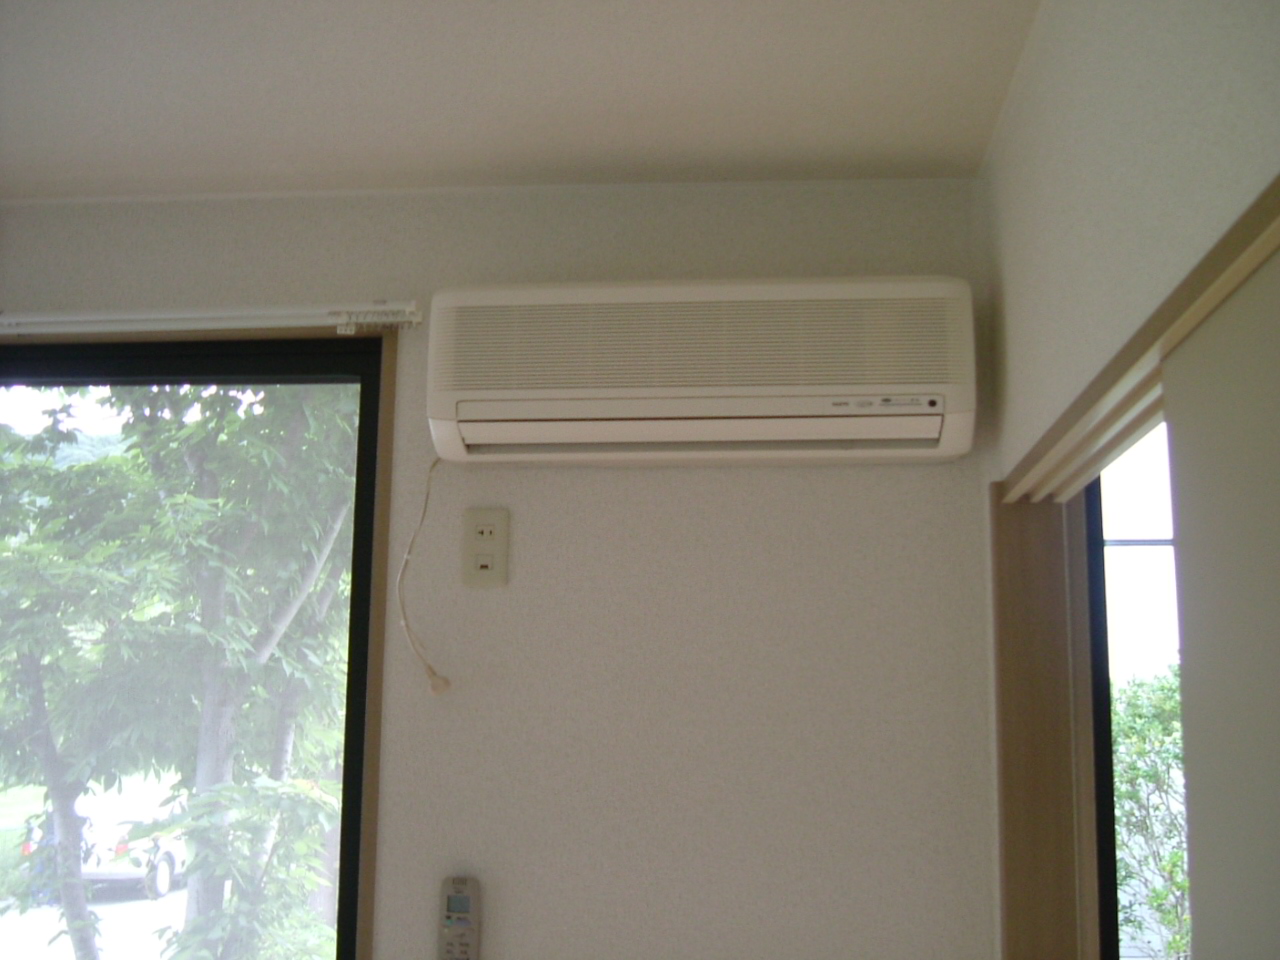 Other Equipment. It is air-conditioned living room.